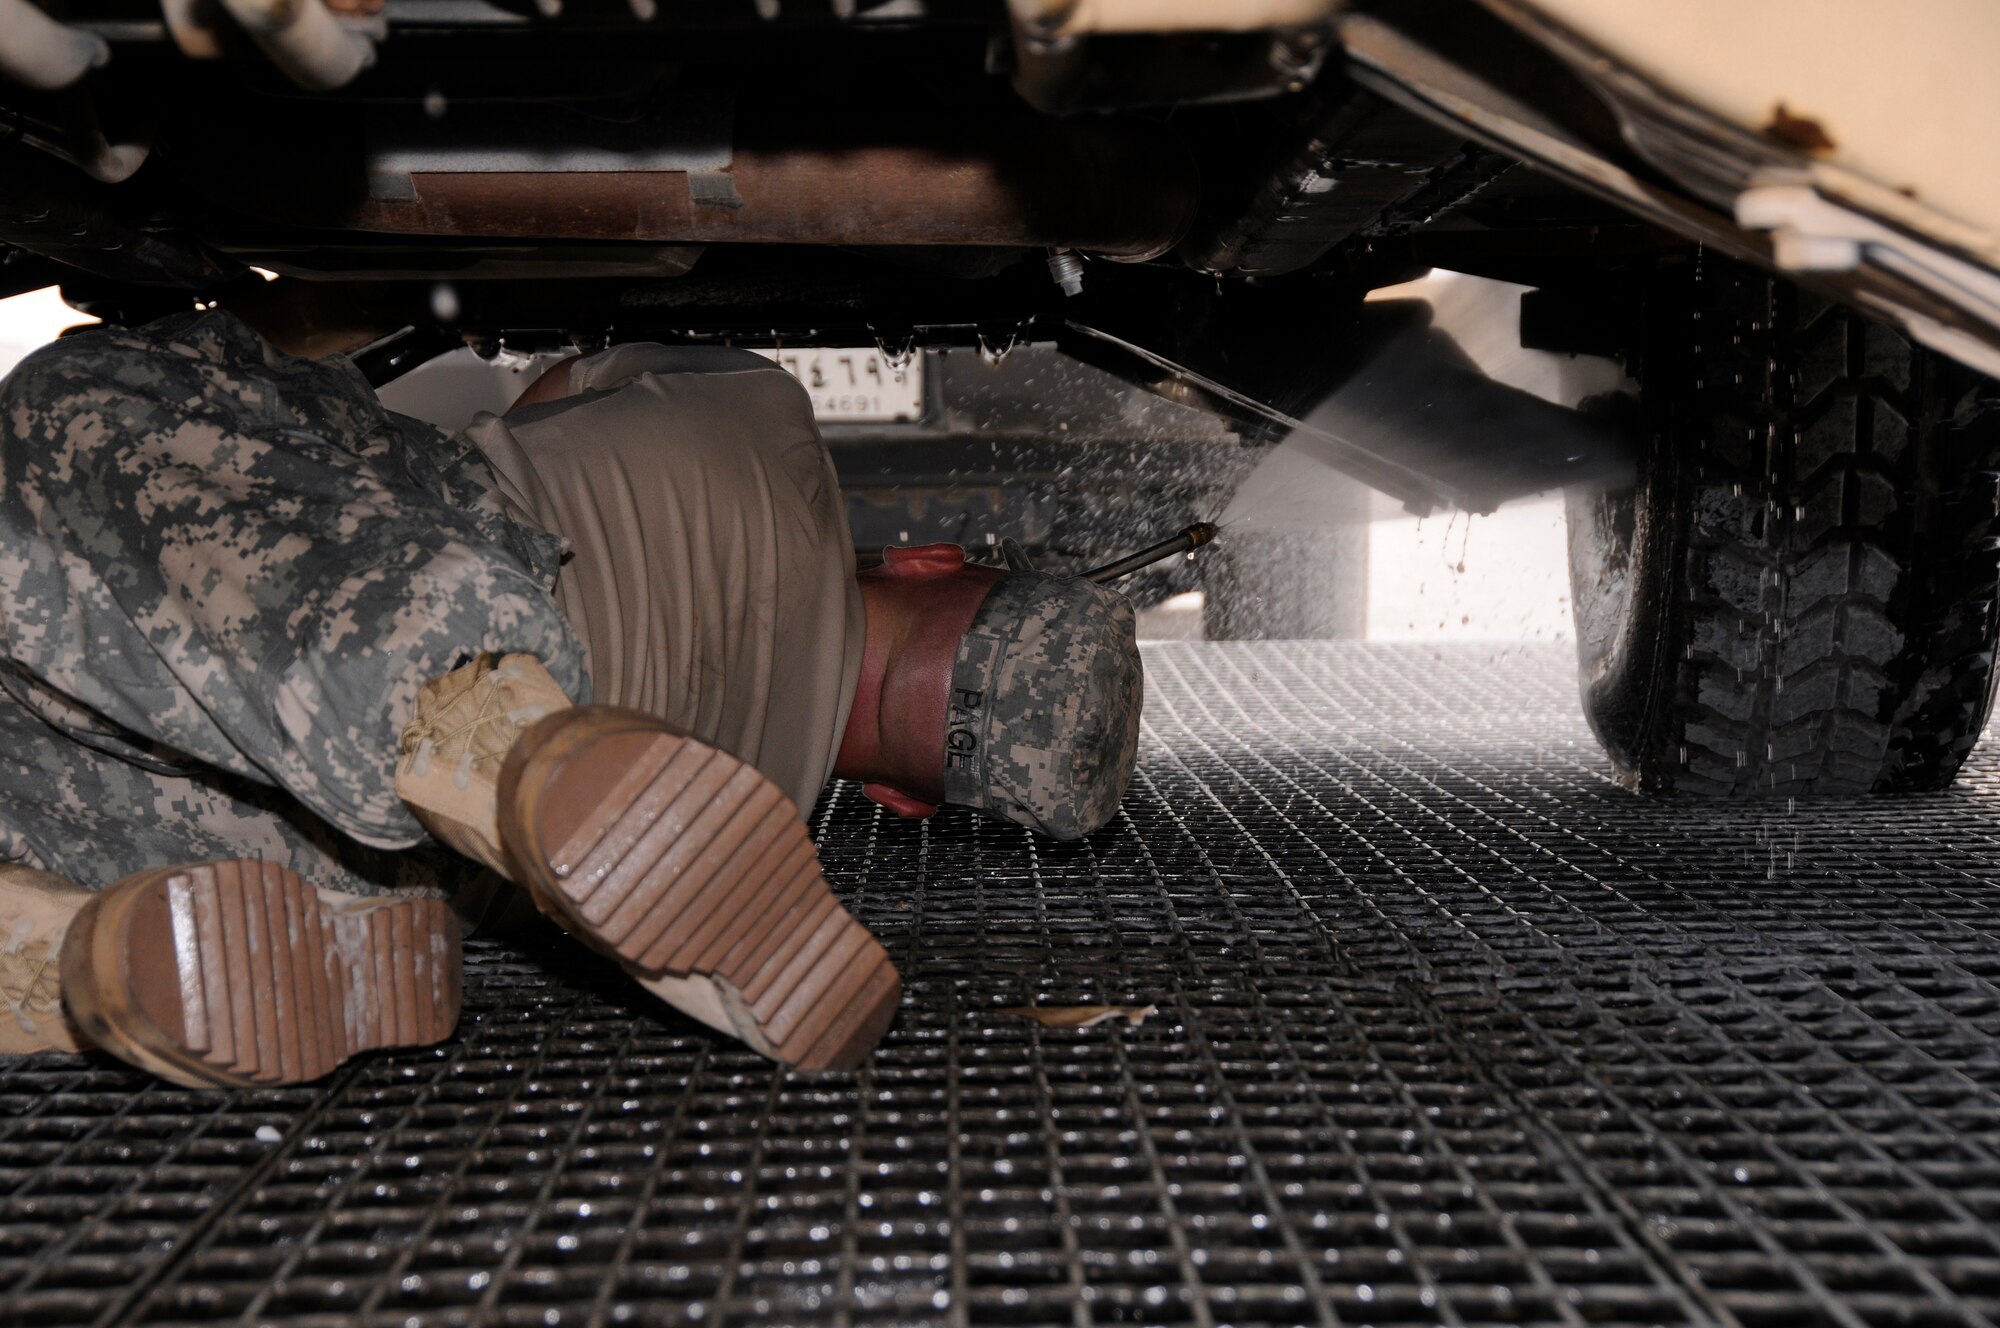 Pfc. Kevin Page, A 2-43, Air Defense Artillery from Fort Bliss, Texas, uses a high pressure water hose to clean the undercarriage of a Battery Command Post (BCP) vehicle Aug. 7, 2008.  The soldiers are cleaning the BCP in preparation for shipping it back to Texas from an undisclosed airbase in Southwest Asia.  (U.S. Air Force photo by Tech. Sgt. Michael Boquette/RELEASED)